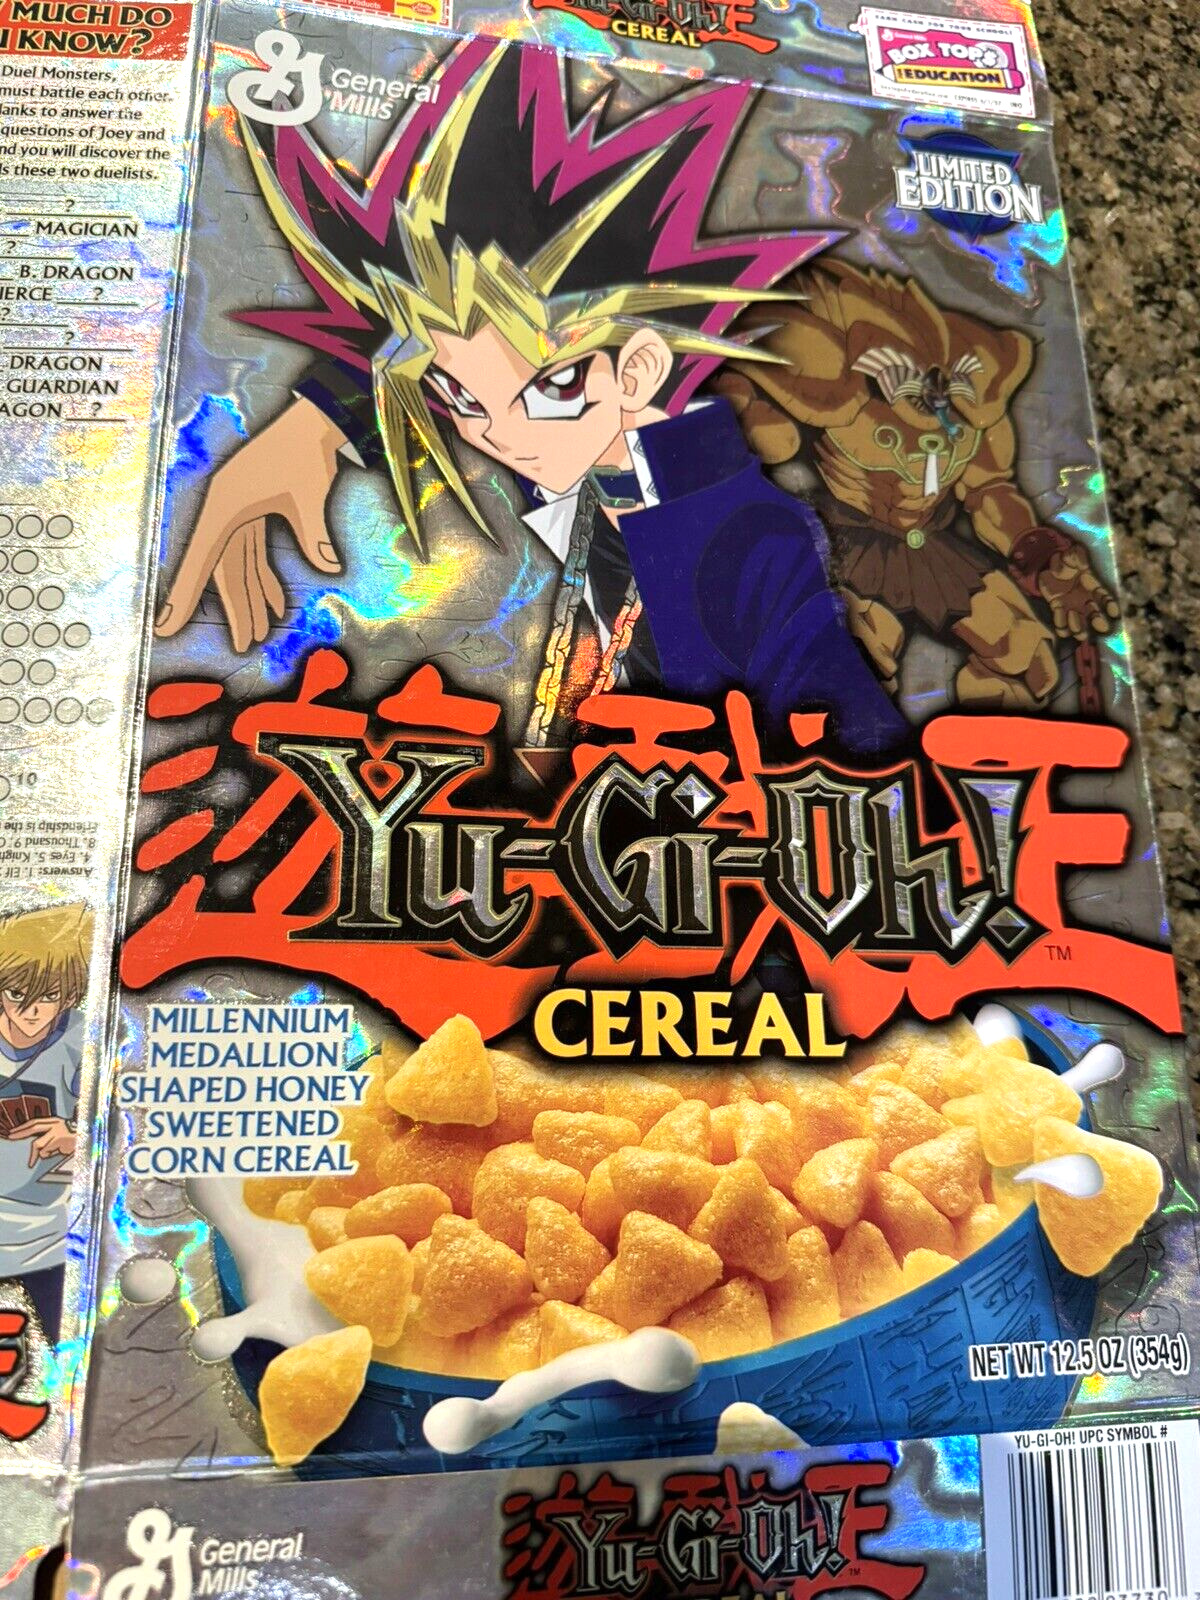 YU-GI-OH Cereal Box 2003 Holographic FOIL Limited Edition-General Mills-empty 